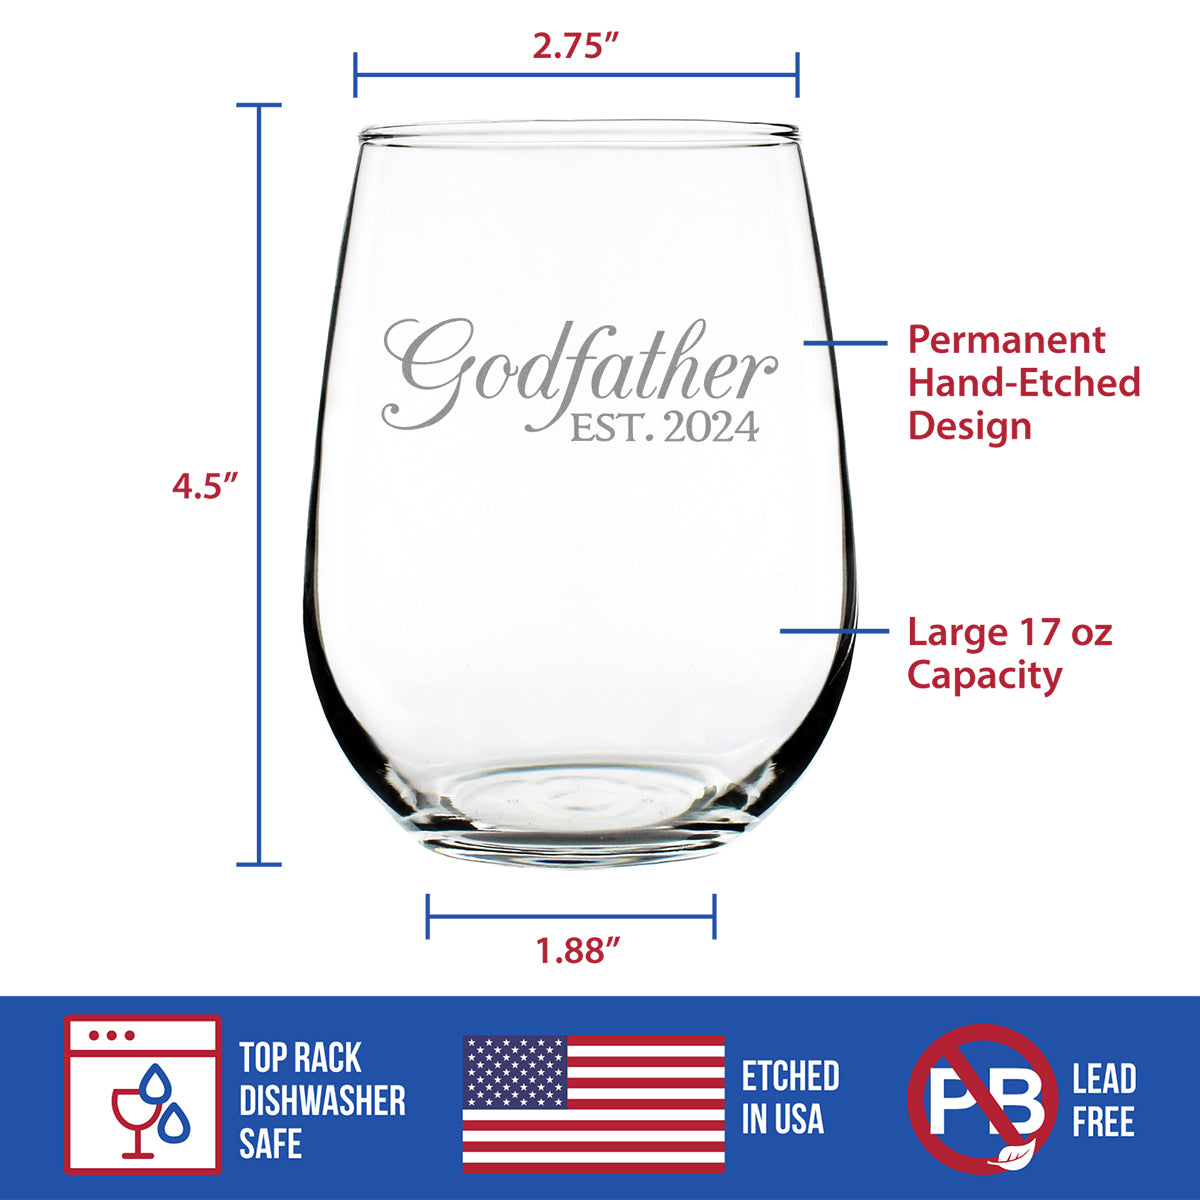 Godfather Est 2024 - New Godfather Stemless Wine Glass Proposal Gift for First Time Godparents - Decorative 17 Oz Large Glasses